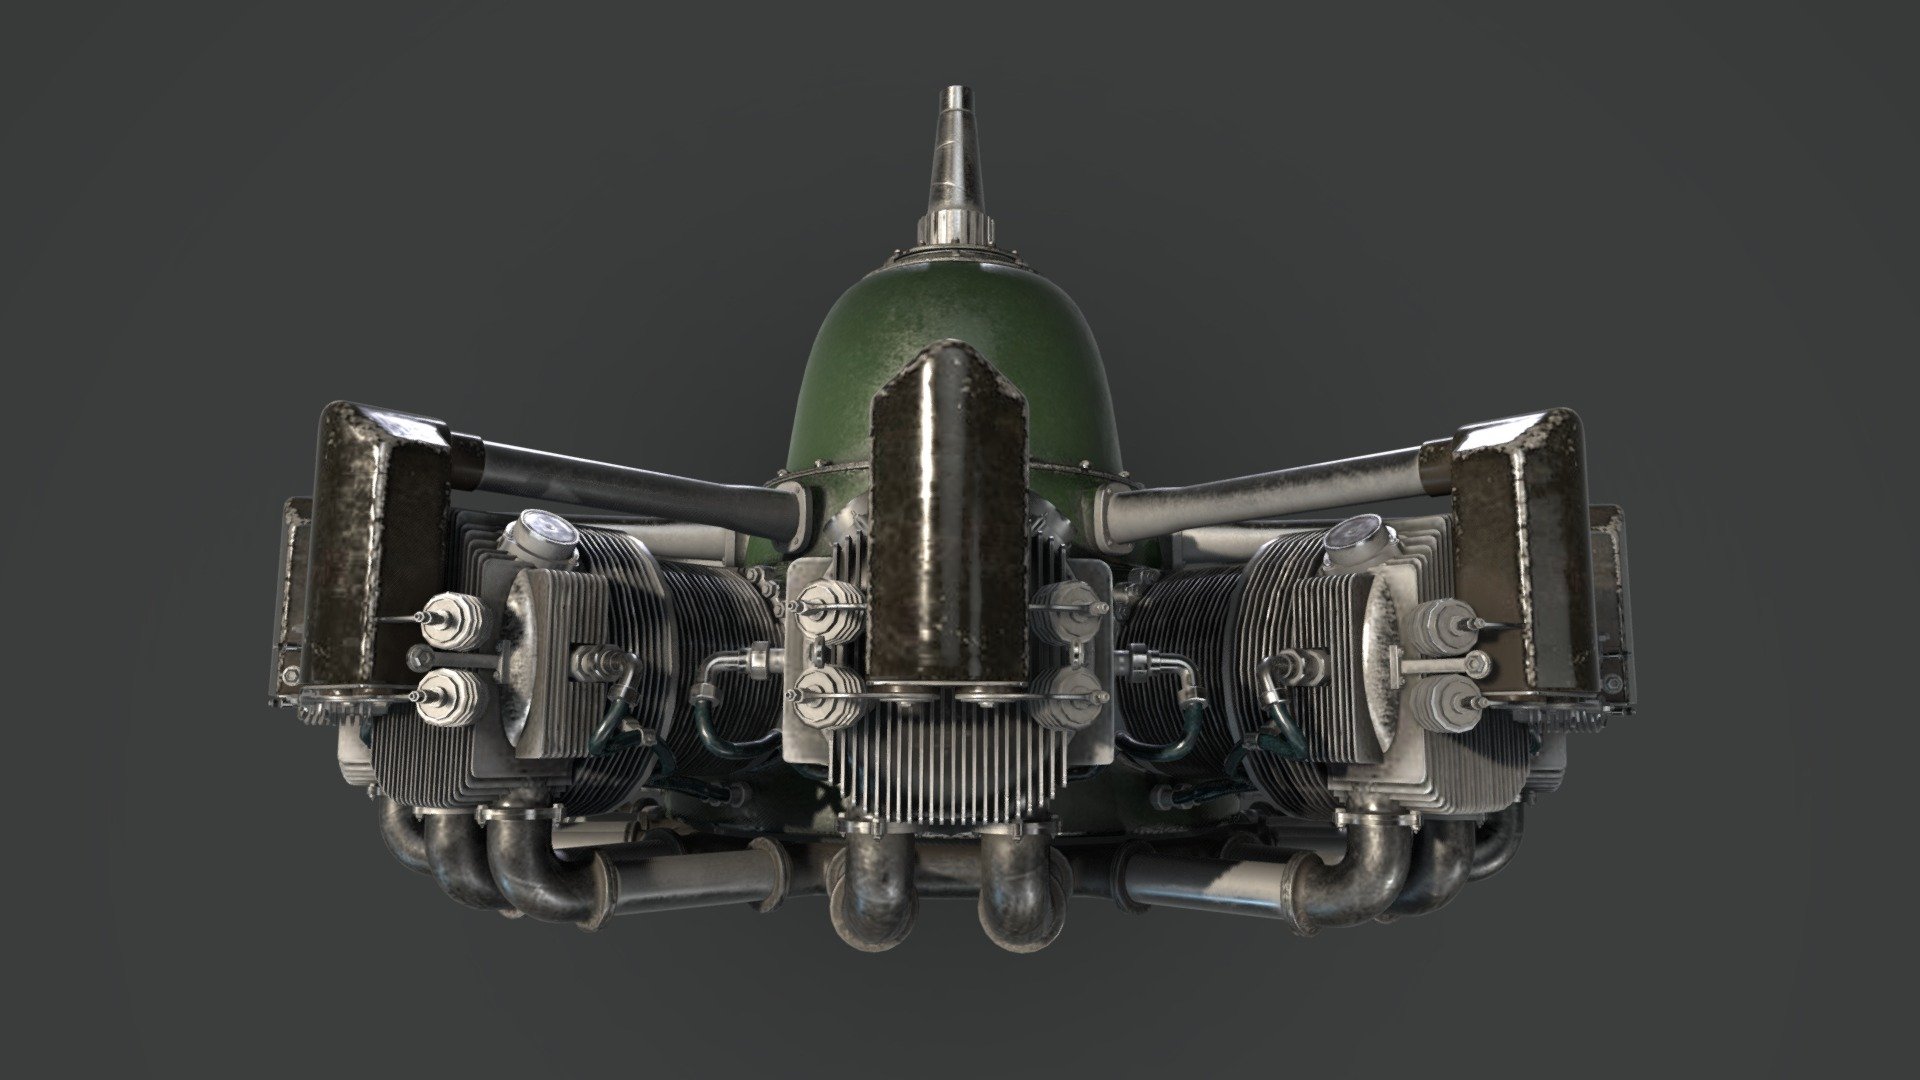 For people who want to provide support: https://www.patreon.com/Agnes3D
Engine manufactured by the Engine Factory in Warsaw on the licence from the British company Bristol. Powered aircraft PZL 37 &ldquo;Moose